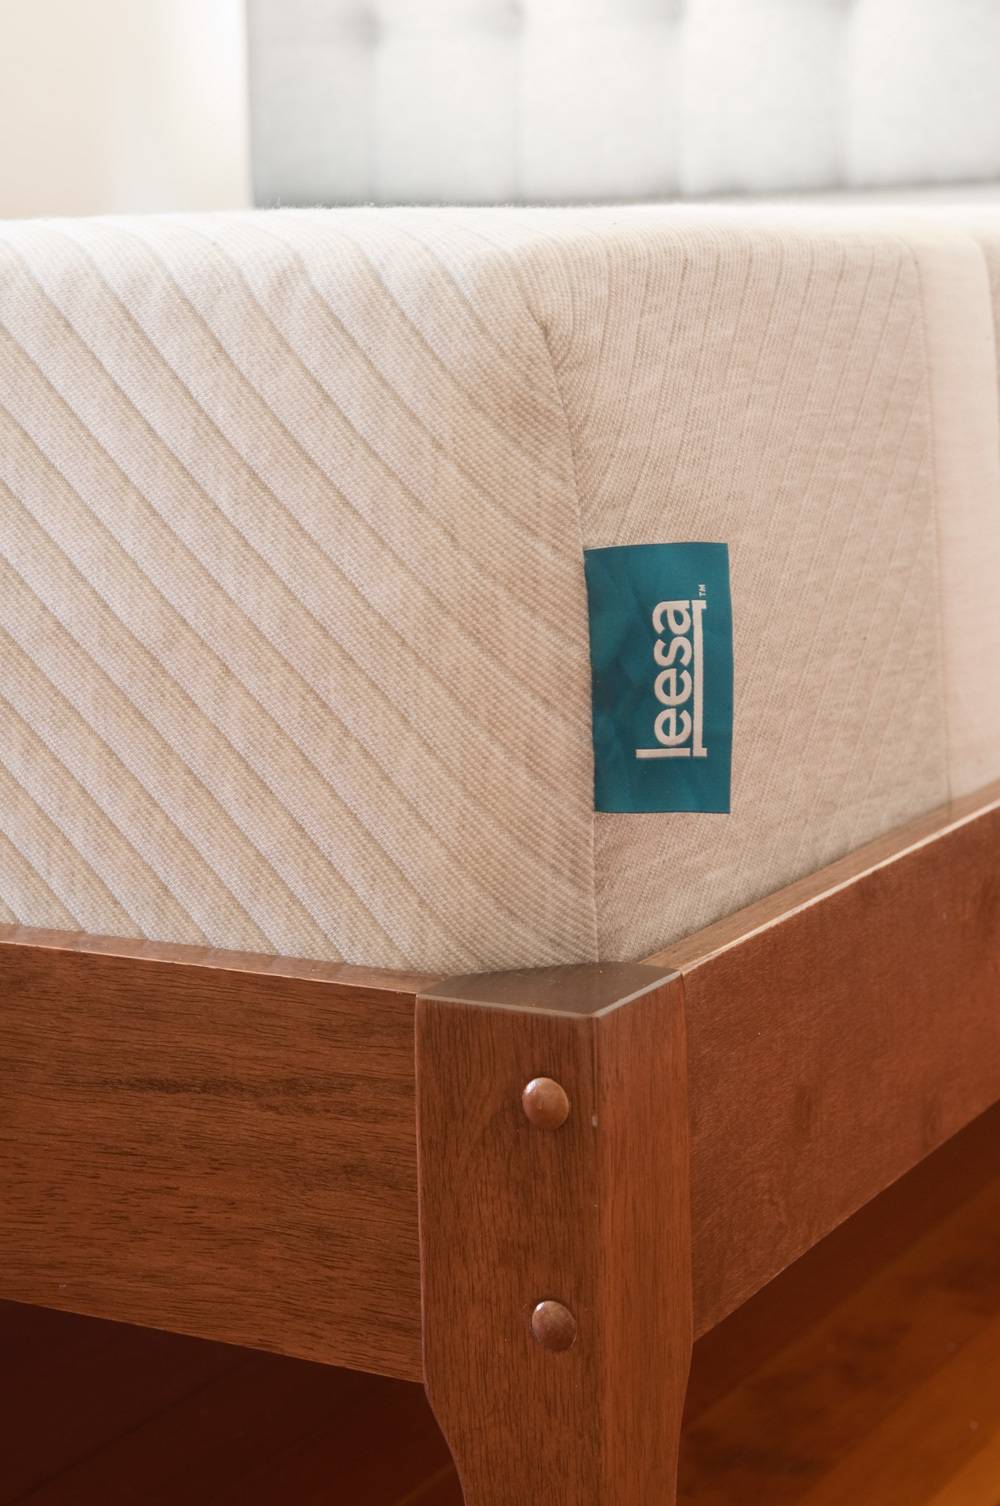 A blue tag is on the corner of a mattress.